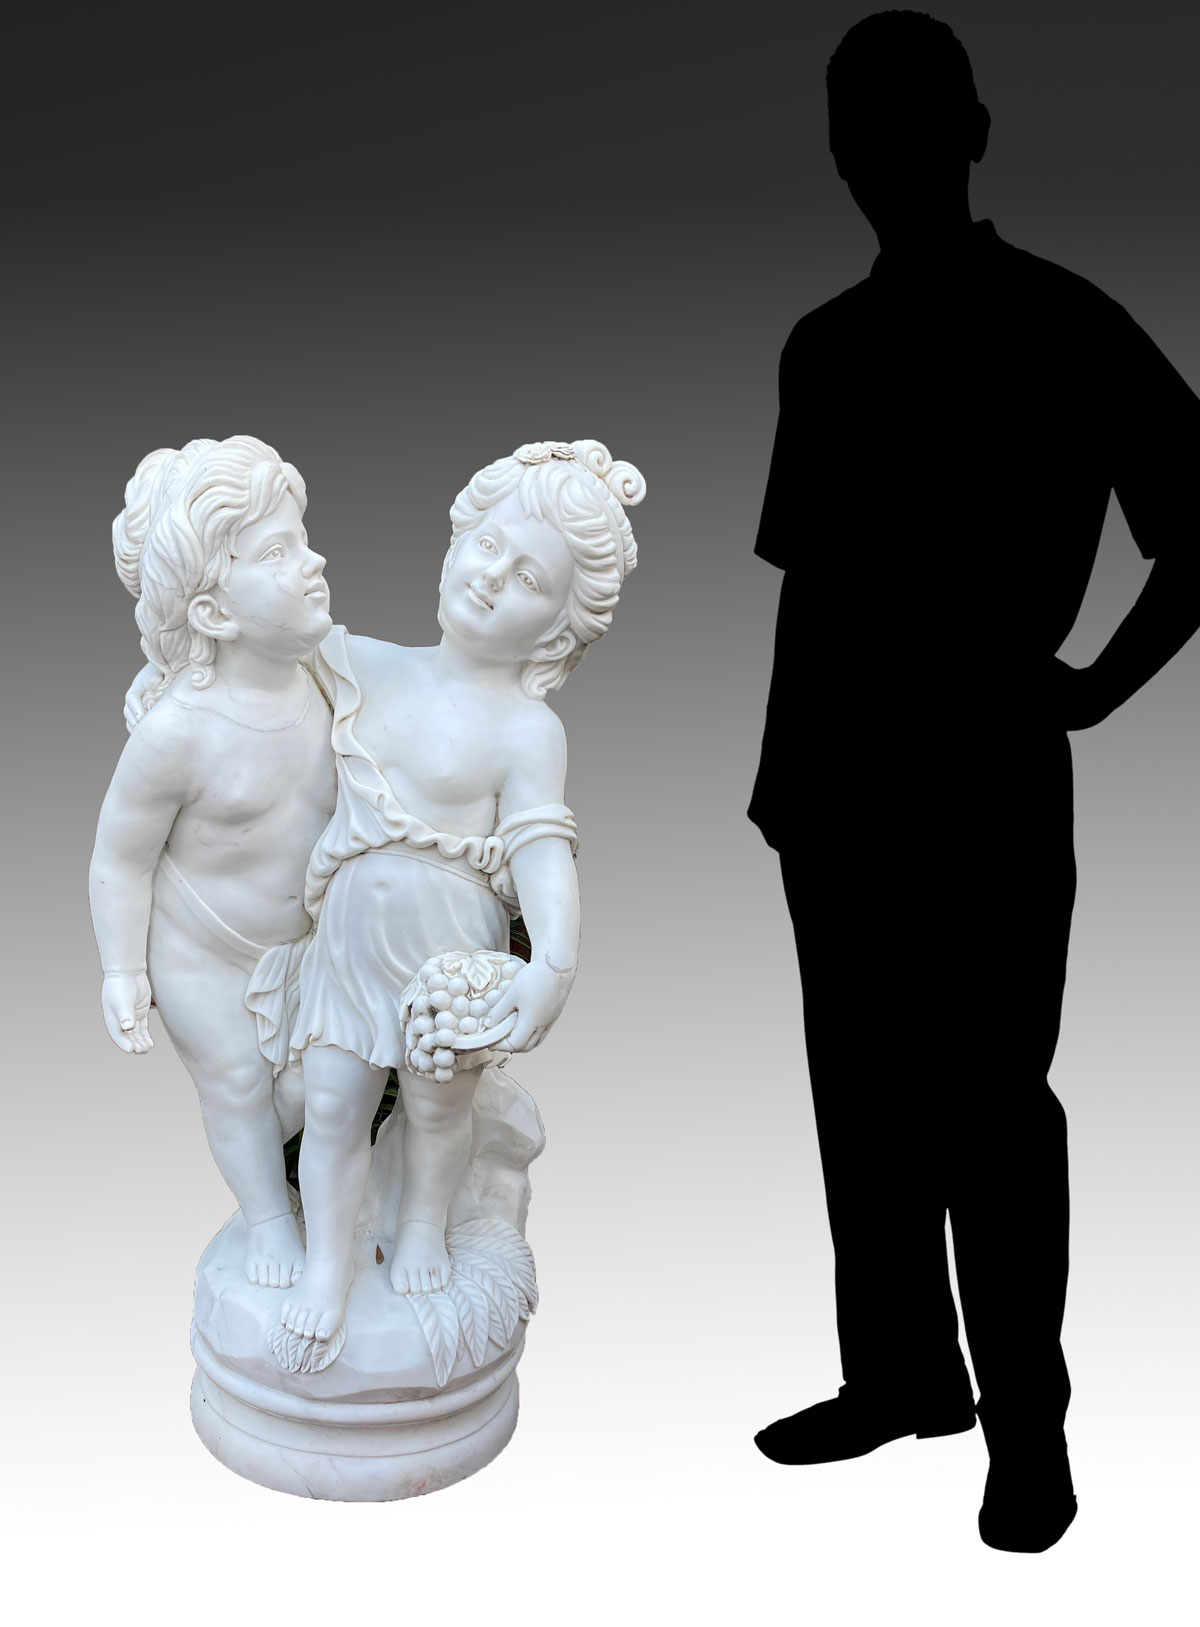 LARGE MARBLE SCULPTURE OF CHILDREN: